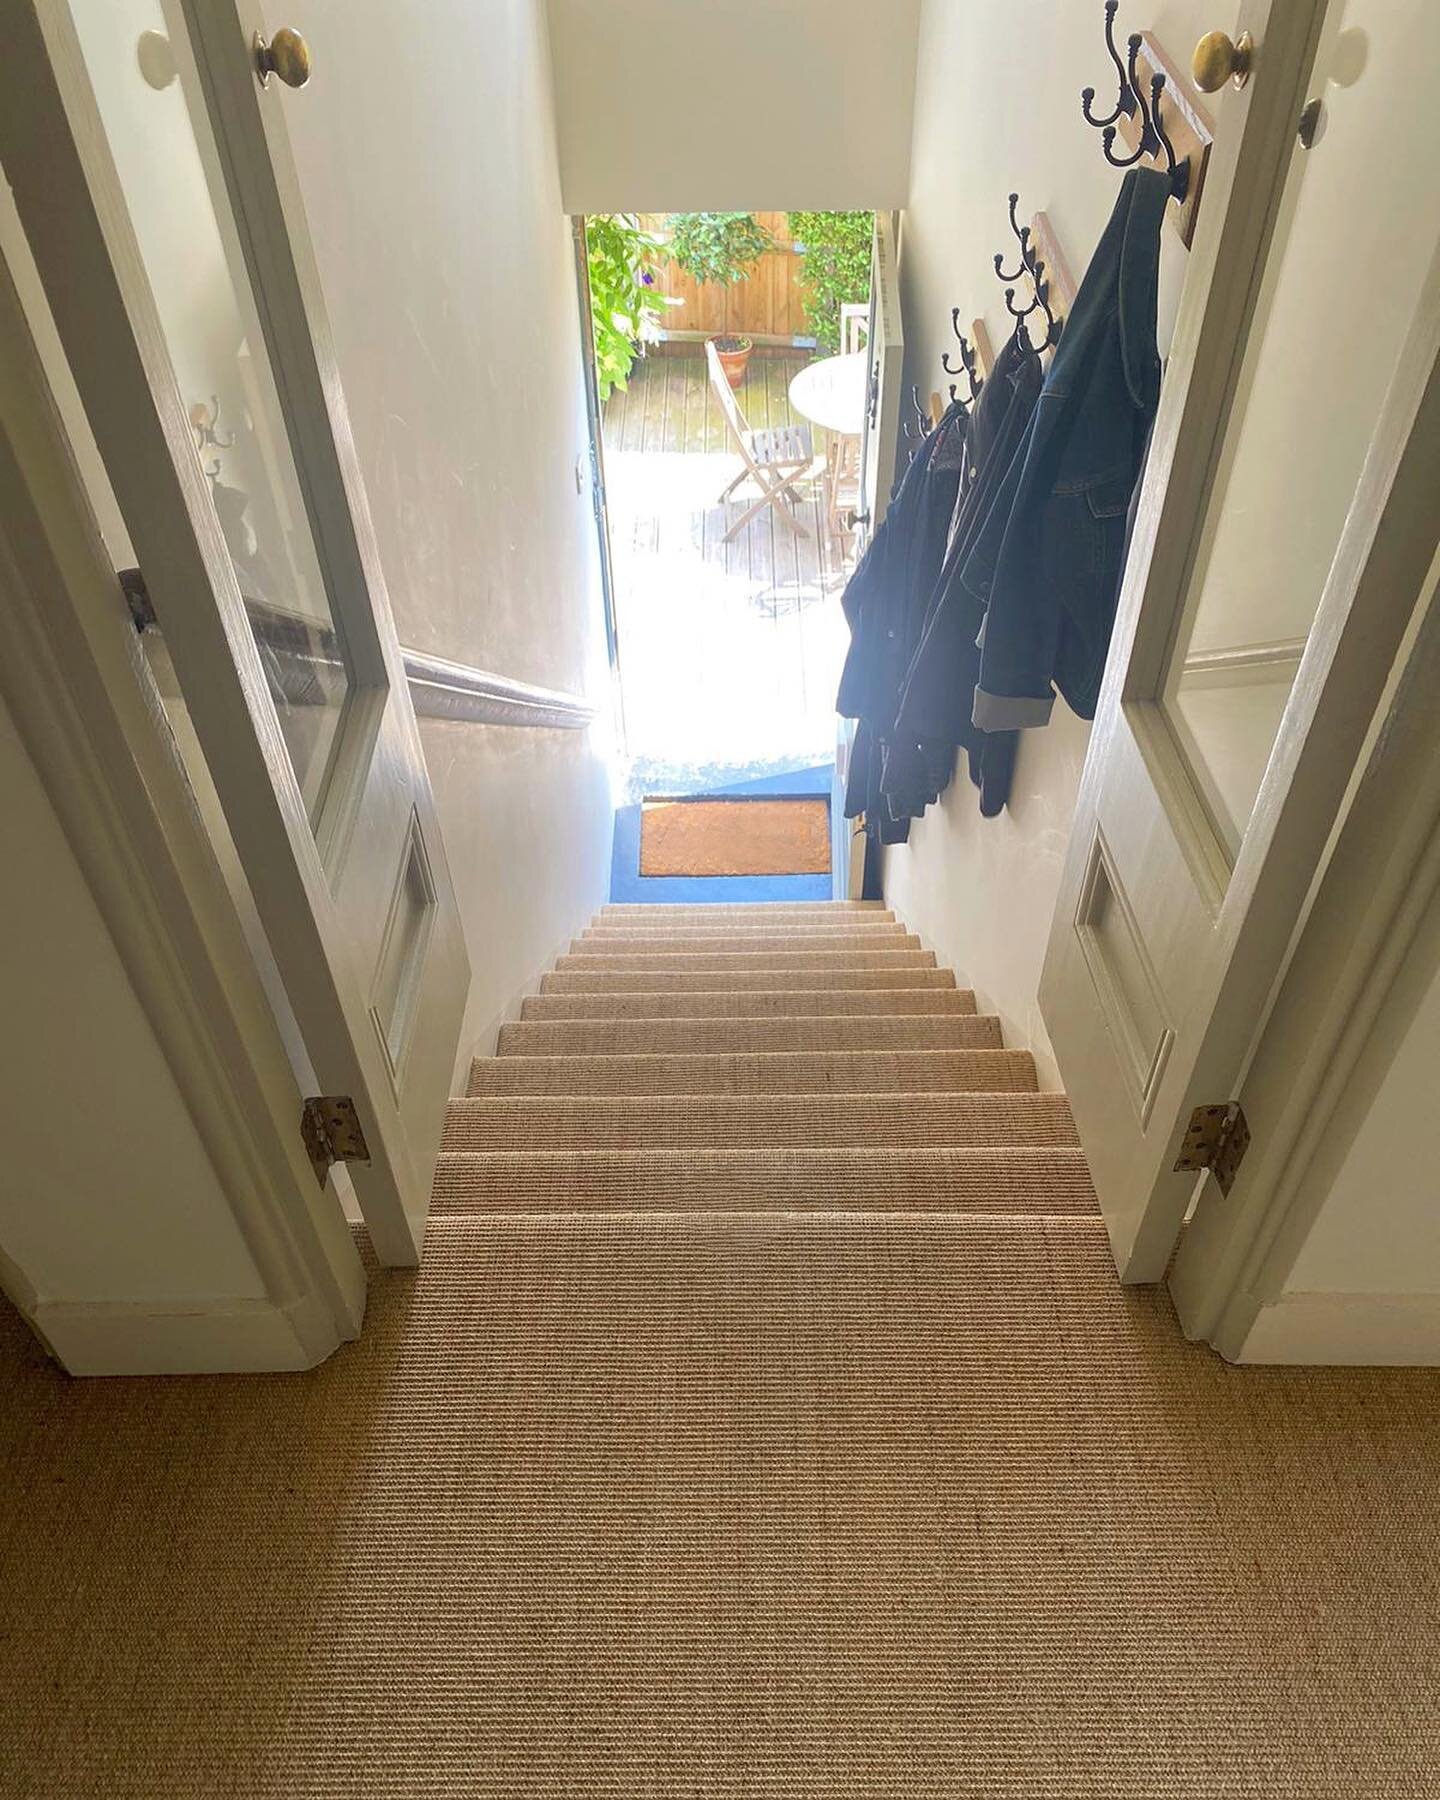 Hardwearing, versatile and great for high-traffic areas, the natural fibres of sisal flooring instantly adds style and sophistication to any home.

Here, our client chose the Sumatra range from Fibre Flooring and we love how the neutral colour does n